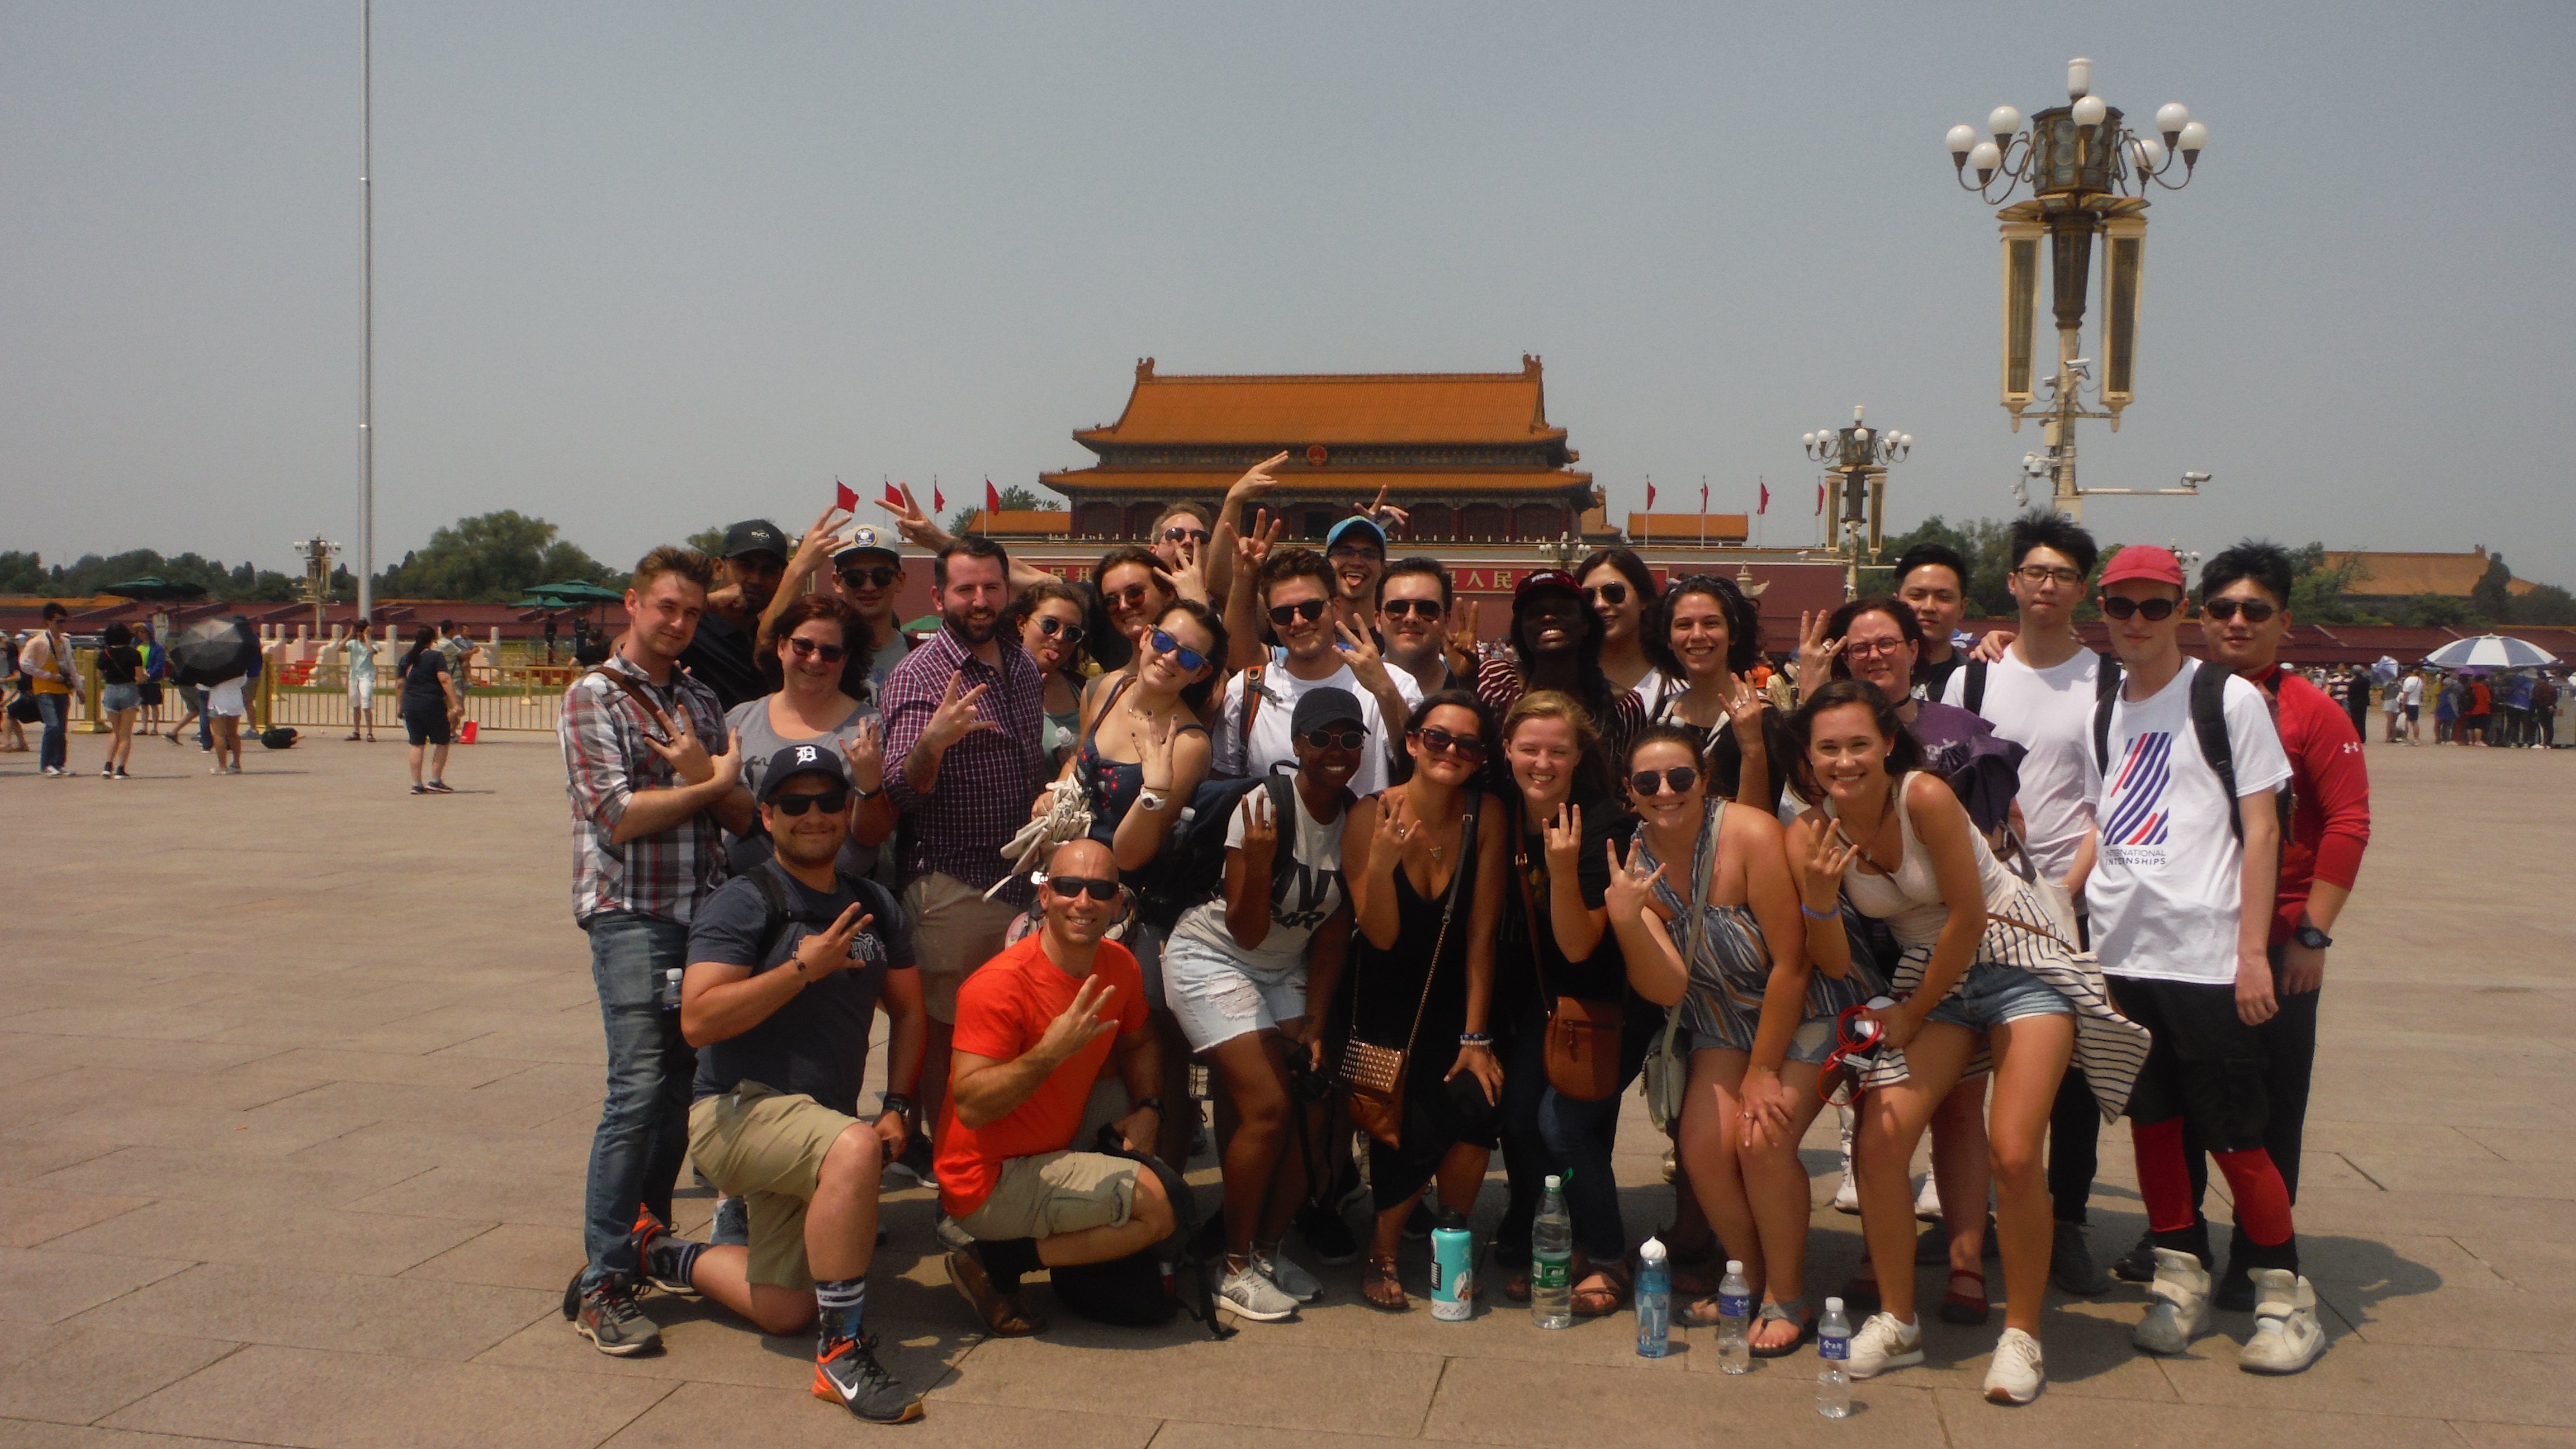 Students stand in front of Forbidden City in Tienanman Square